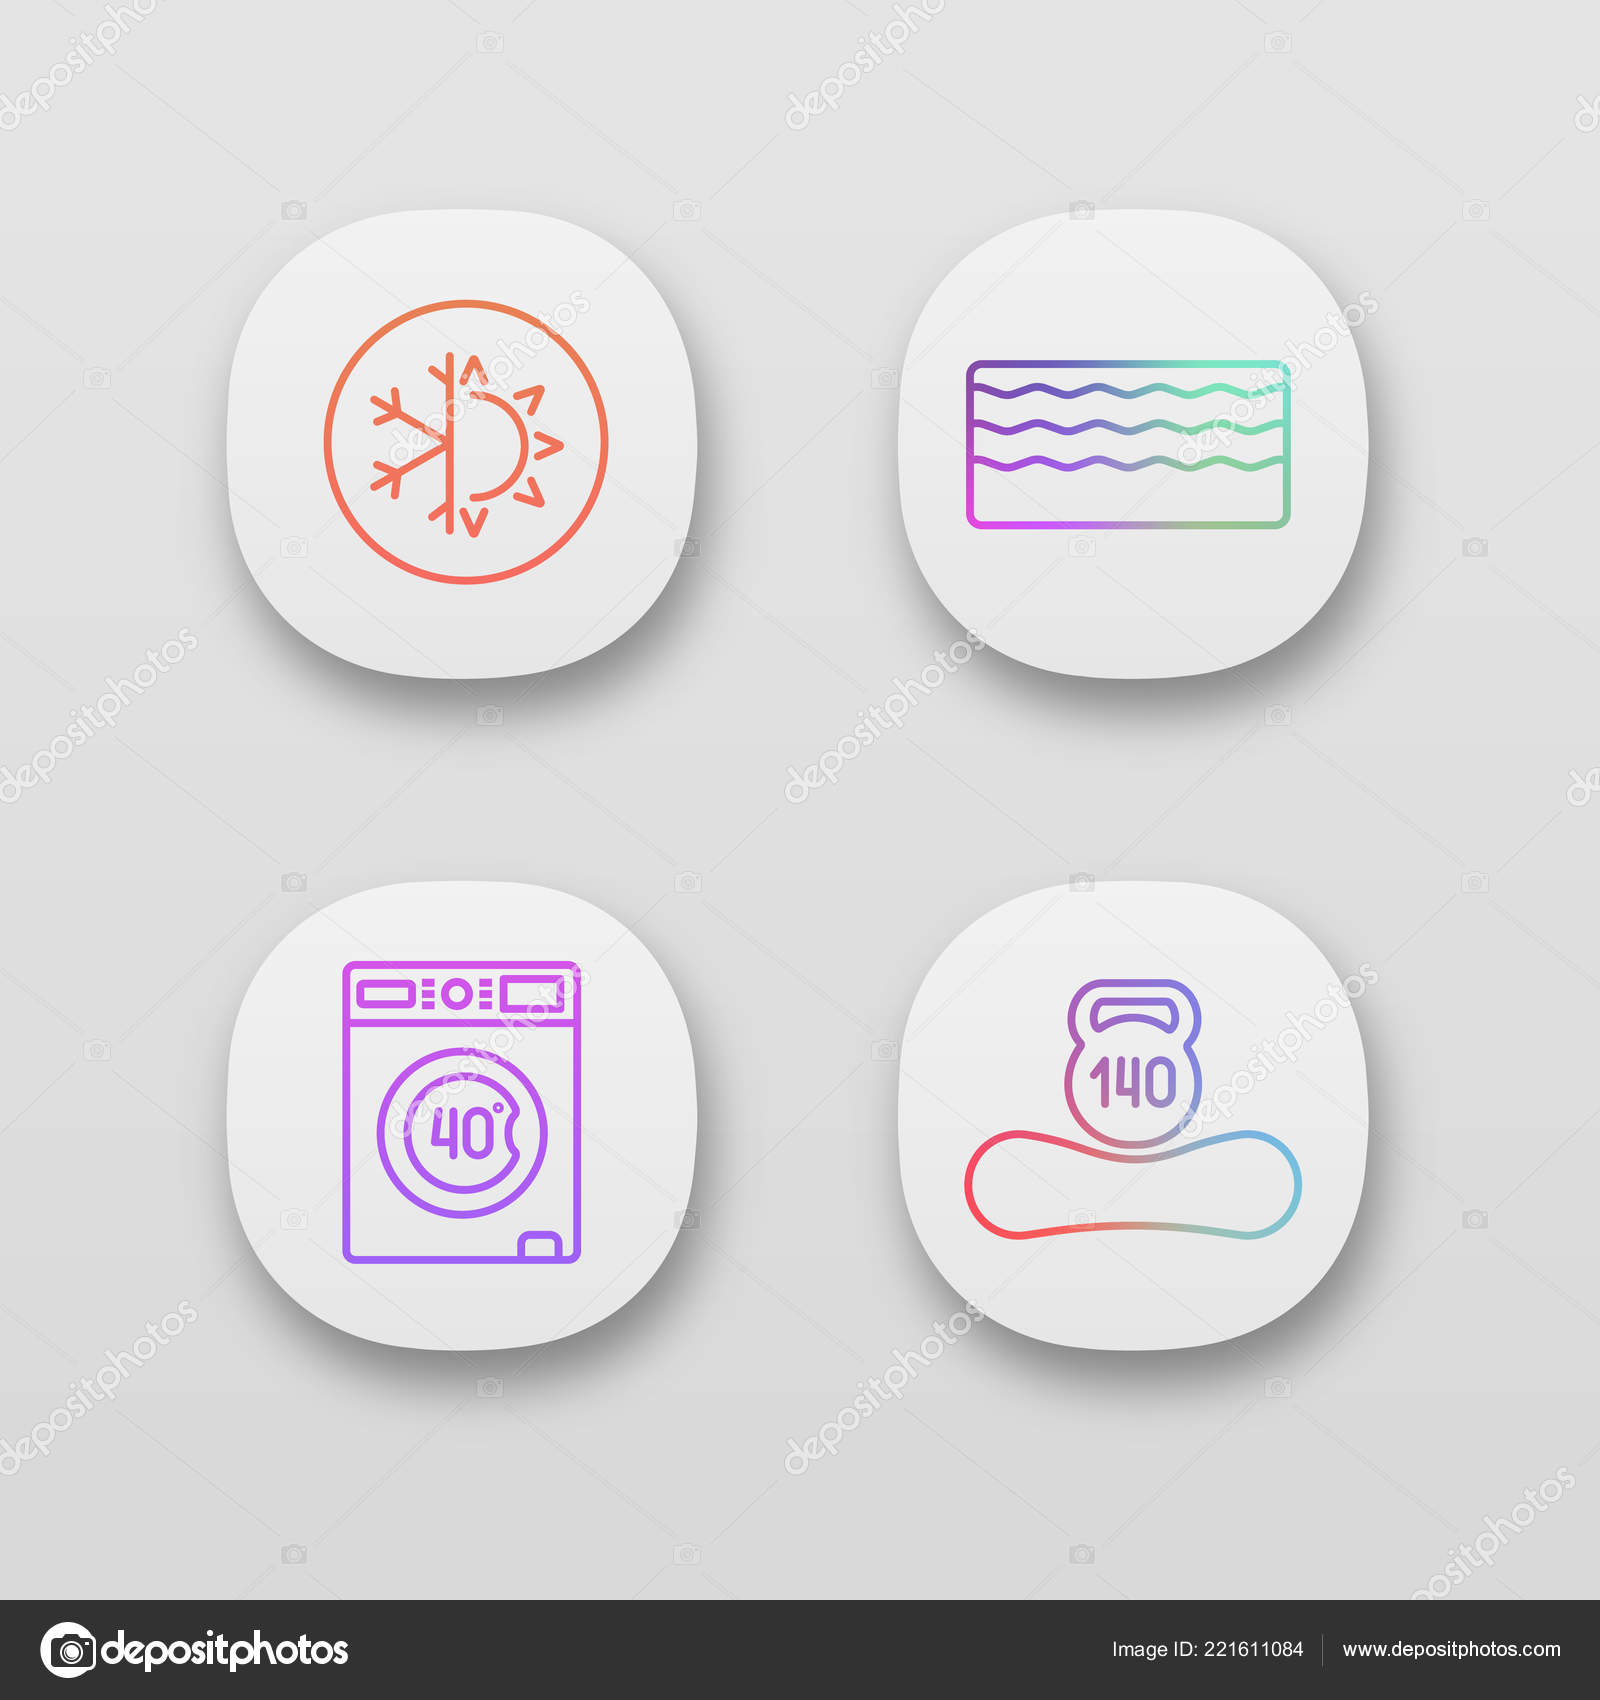 Sd card - Free interface icons